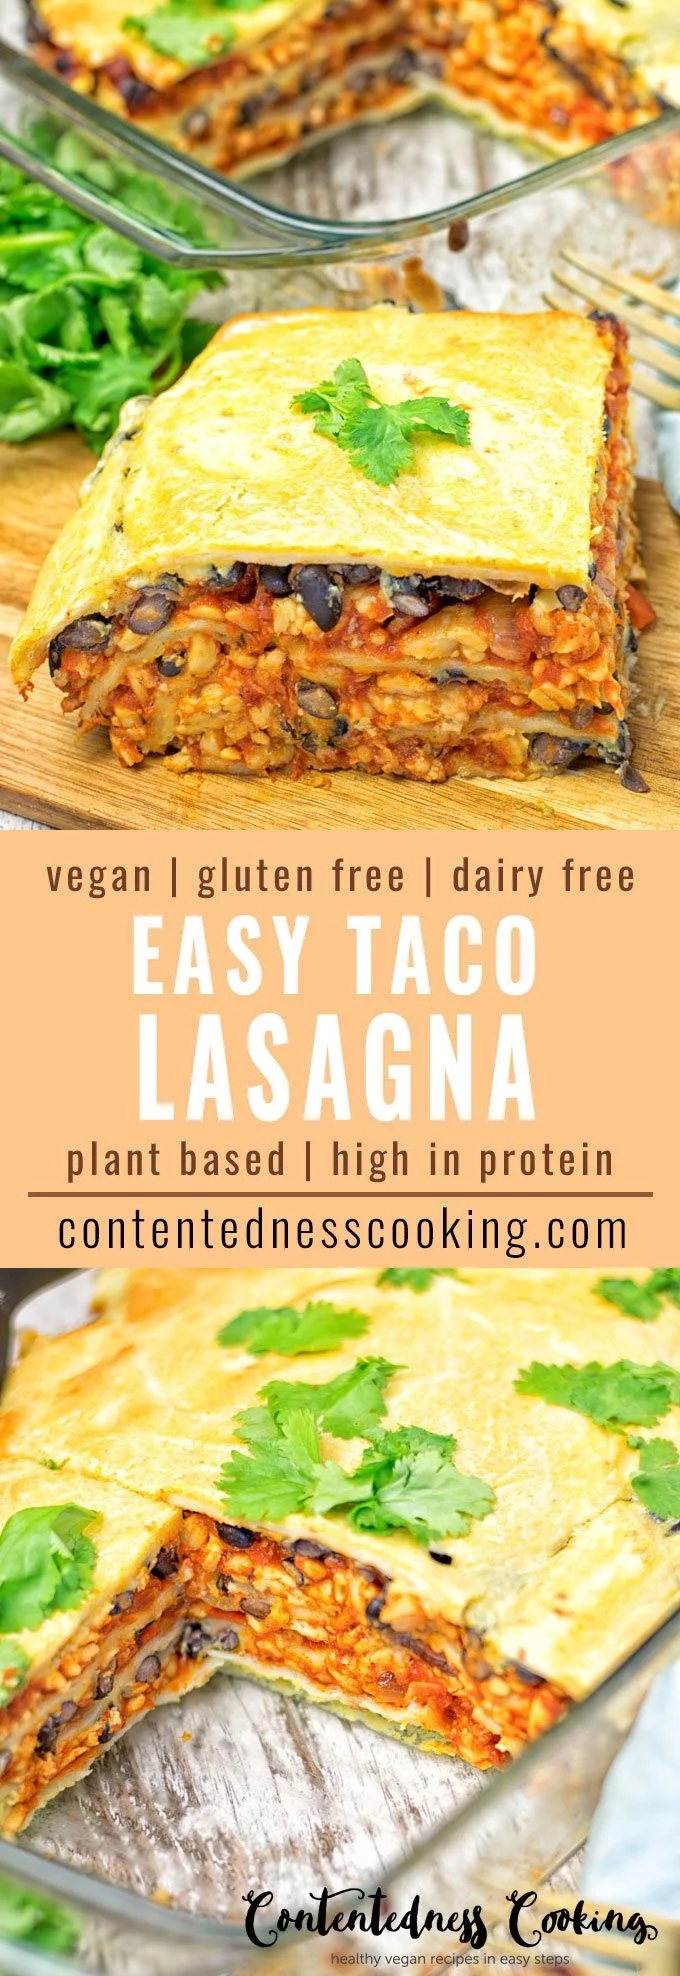 Collage of two pictures of the Easy Vegan Taco Lasagna with recipe title text.